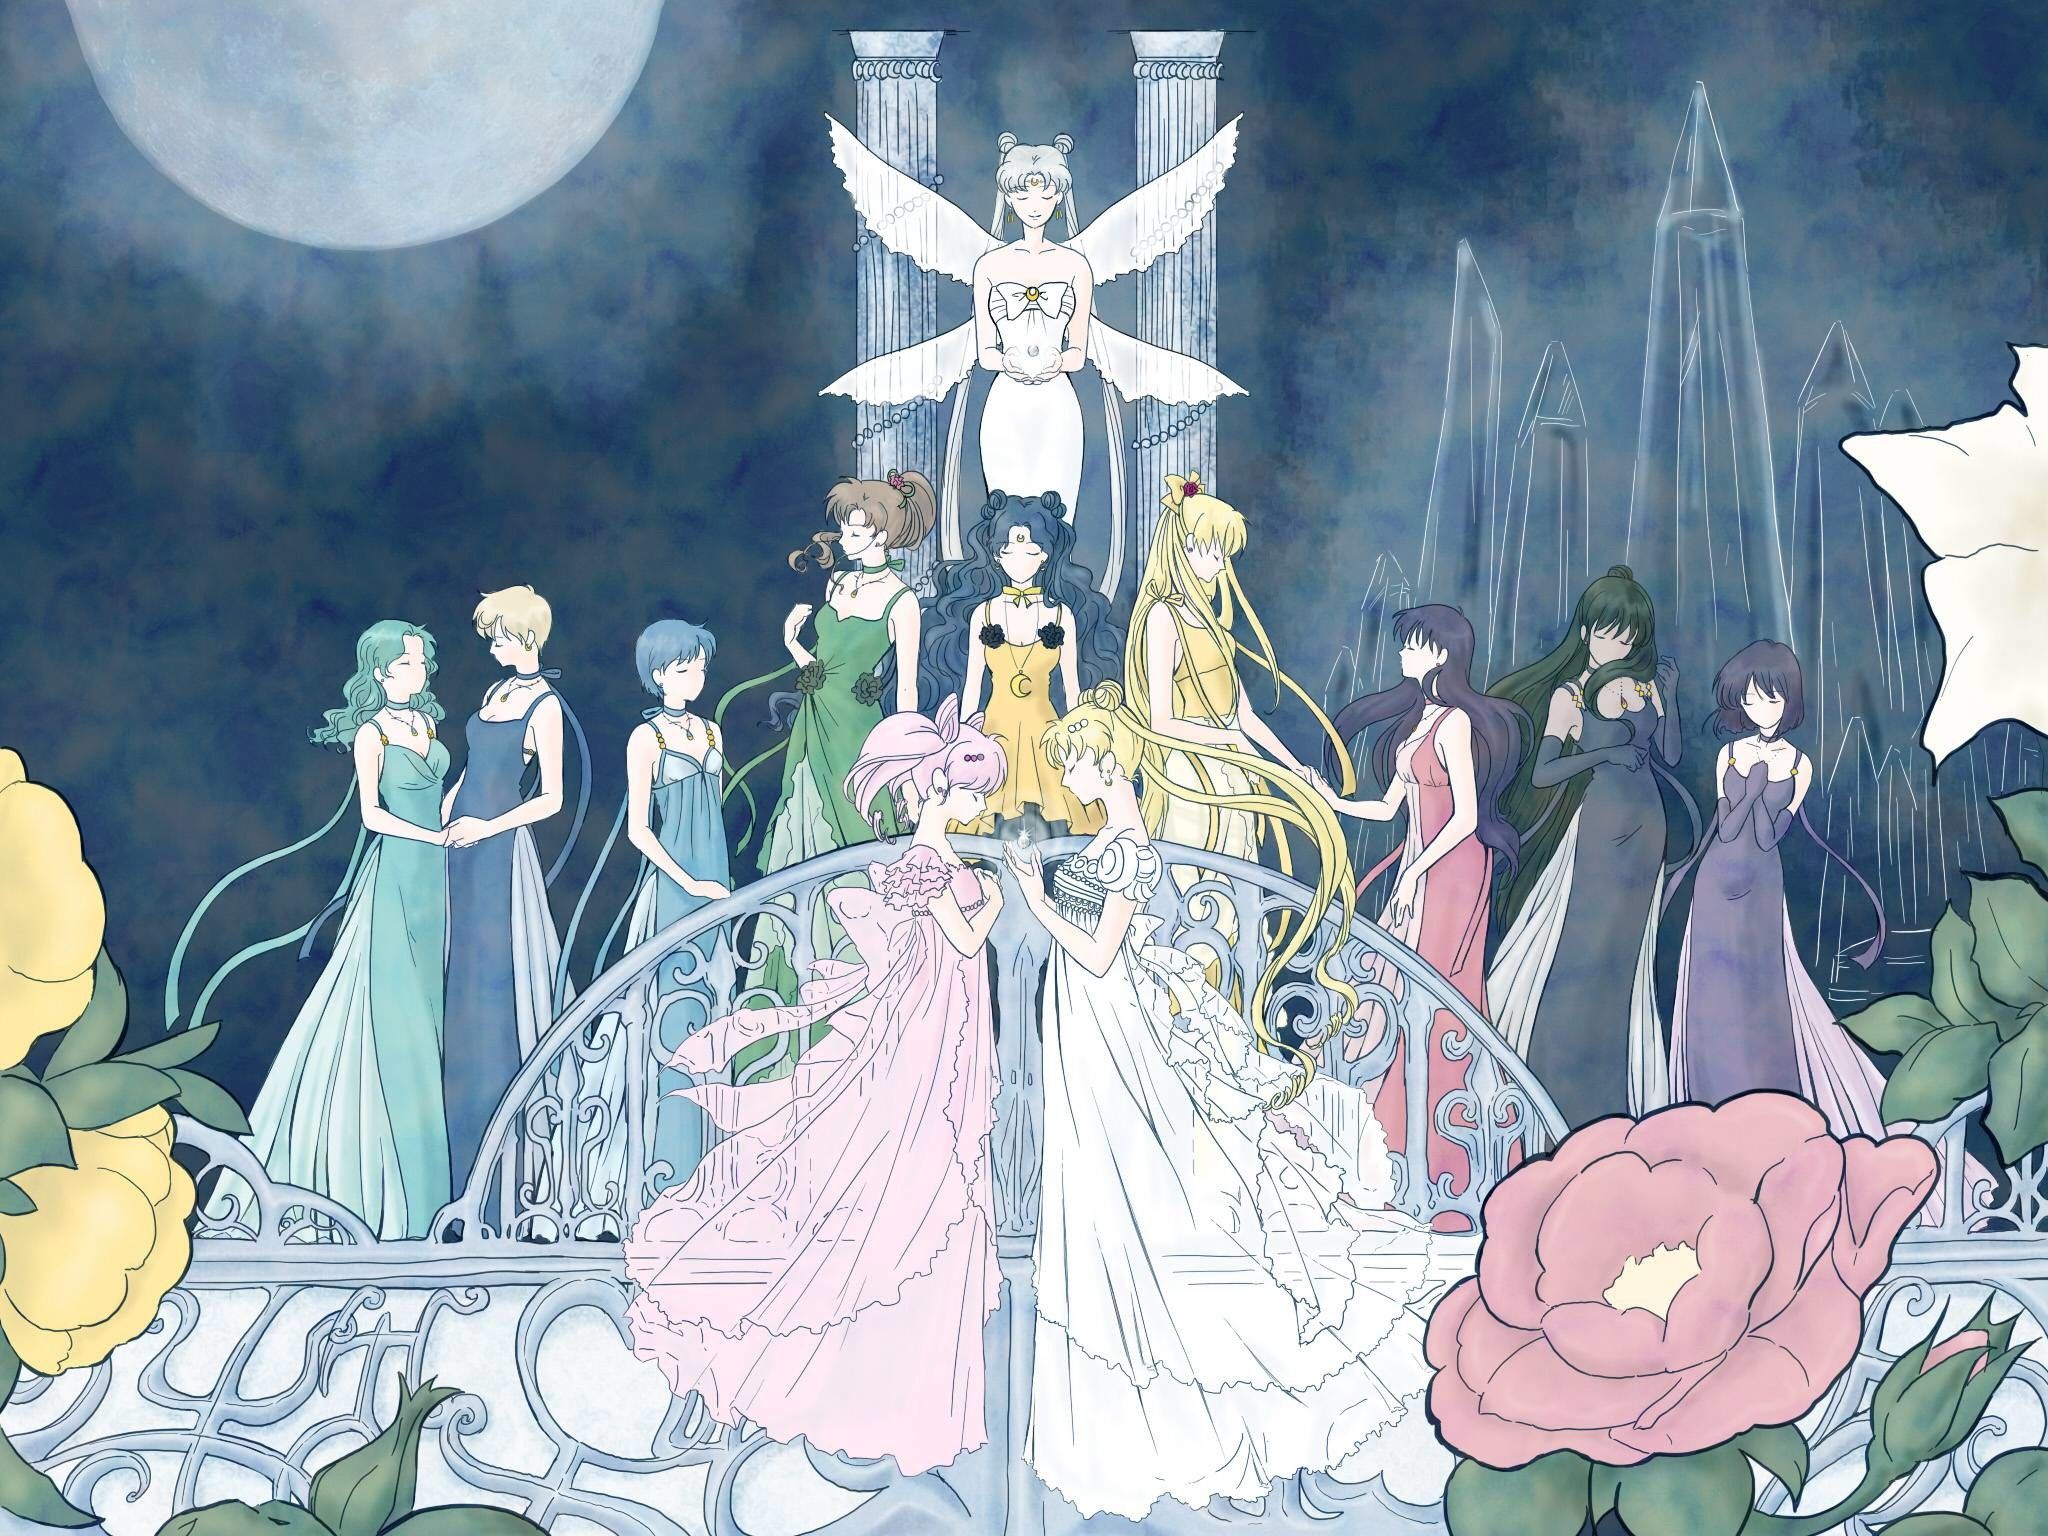 A group of women in dresses and flowers - Sailor Moon